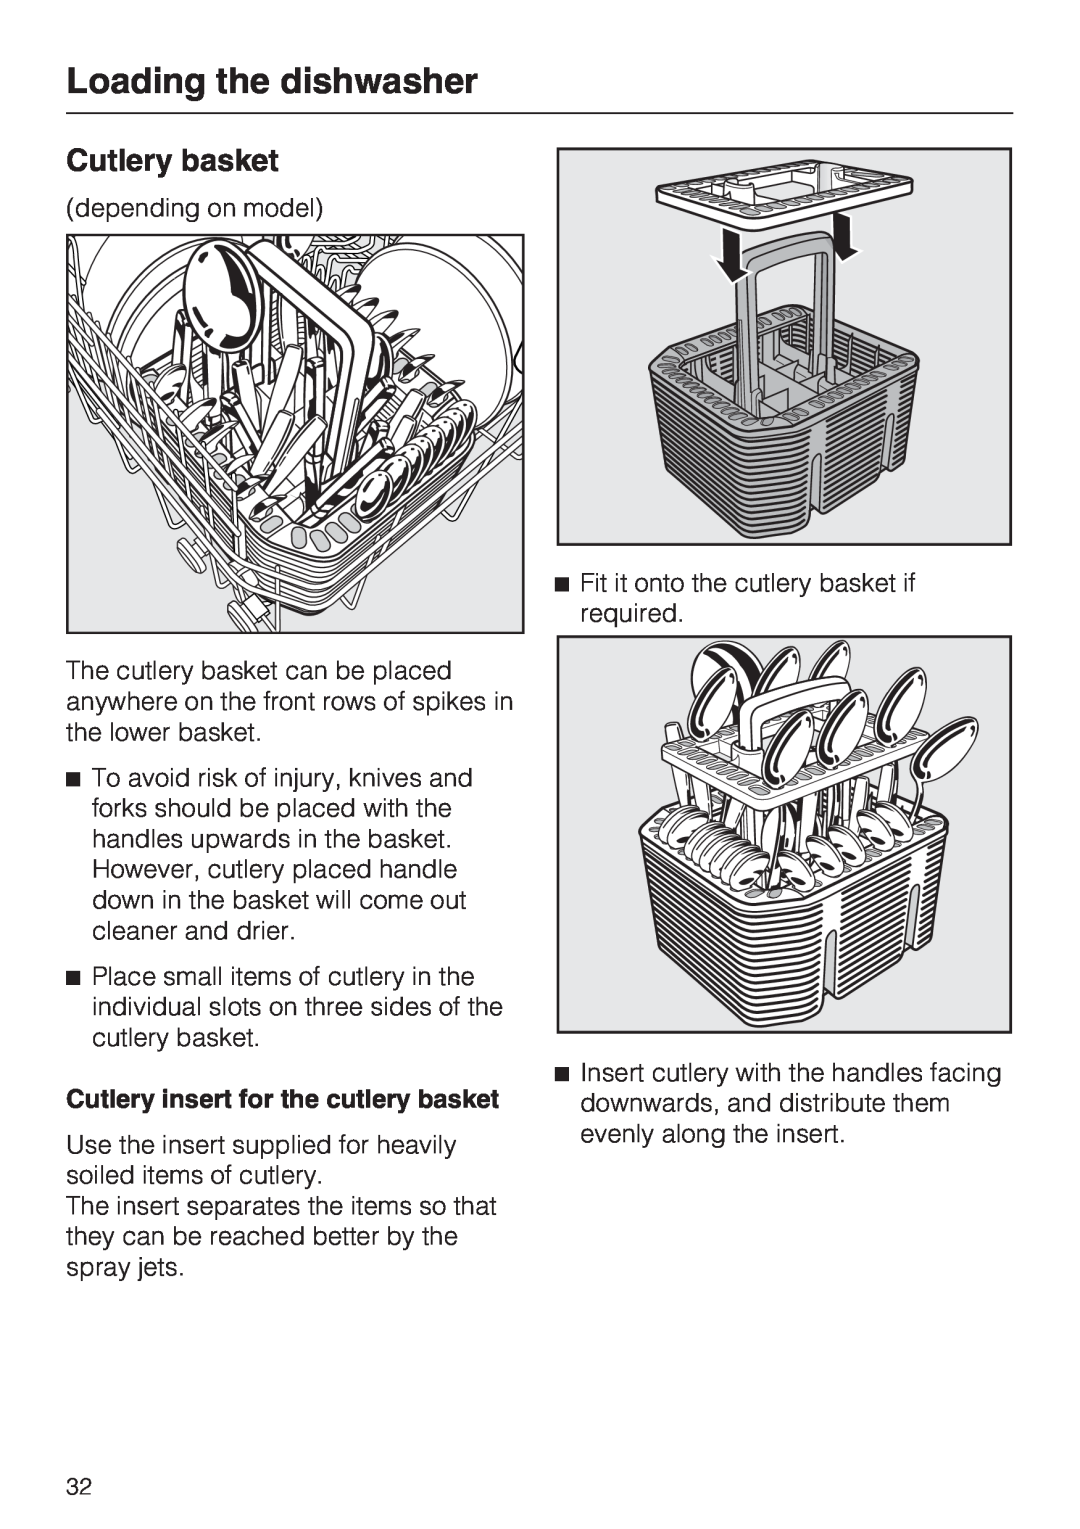 Miele G 5915, G 5910 operating instructions Cutlery basket, Loading the dishwasher, Cutlery insert for the cutlery basket 